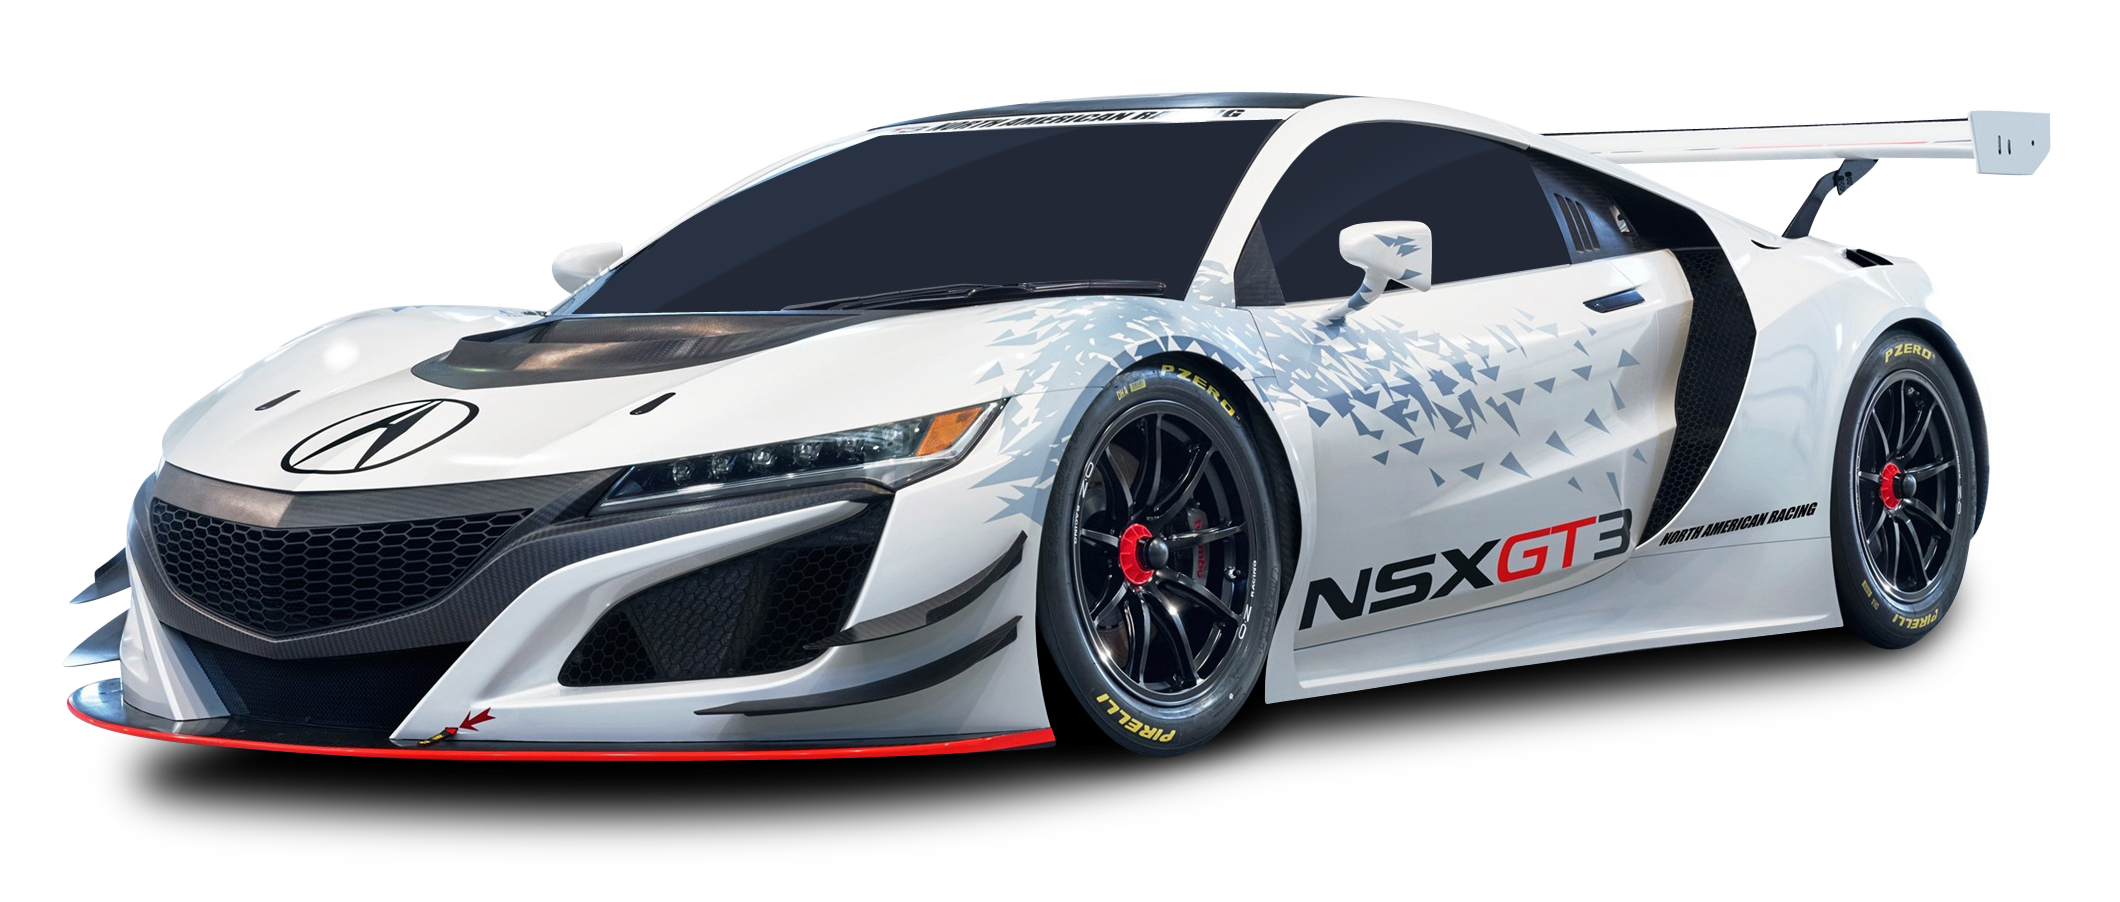 Acura Nsx Gt3 Racing White Car Png Image - Acura, Transparent background PNG HD thumbnail